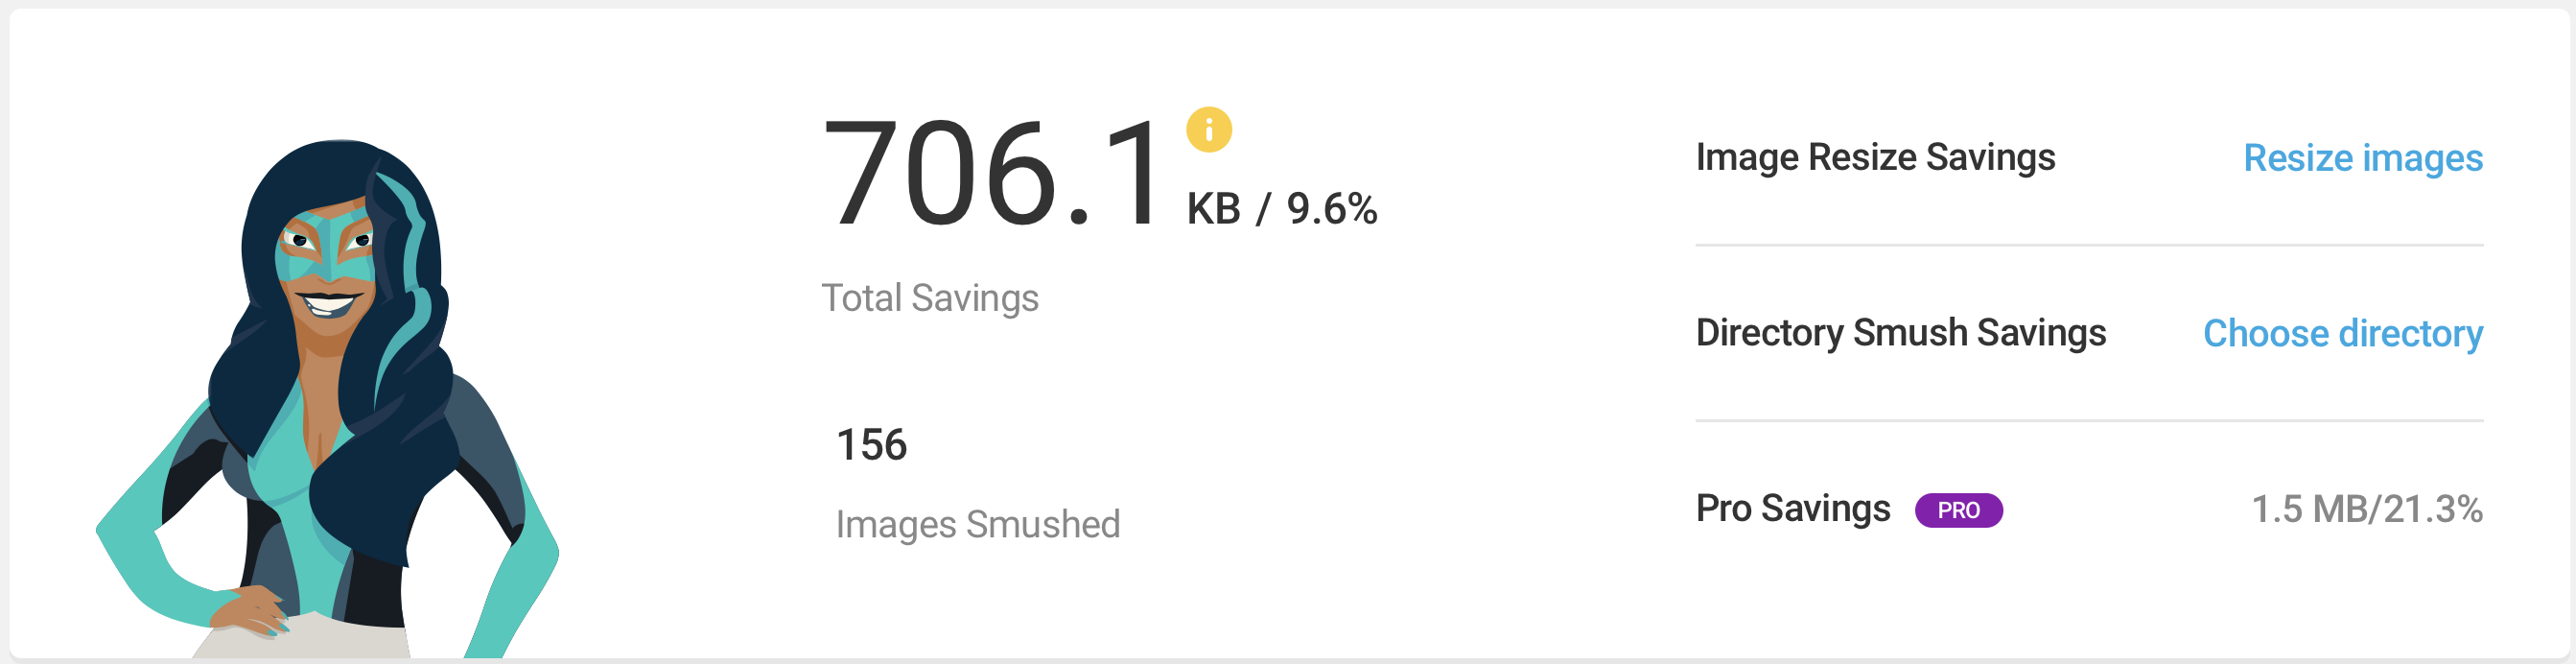 Image for one of the top WordPress plugins for marketers — Smush. Displaying the Smush dashboard showing savings.